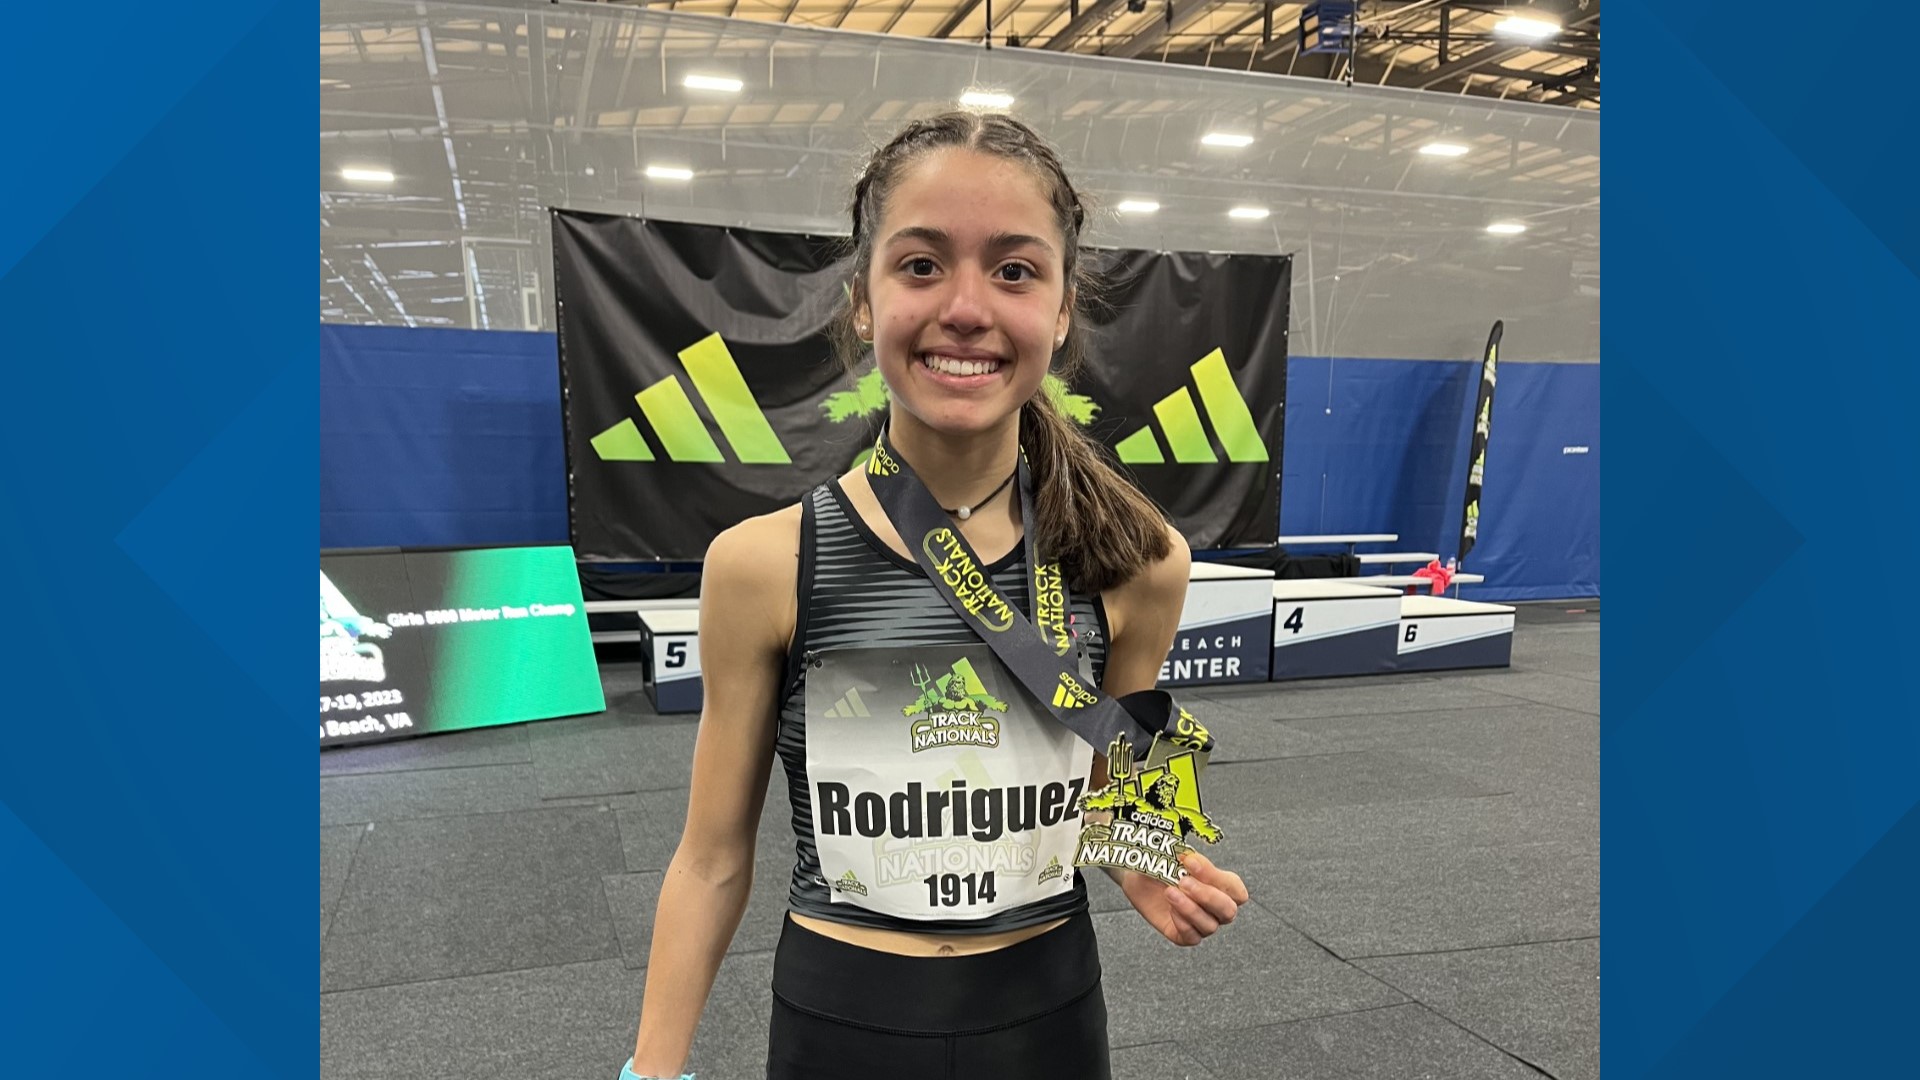 Sophia Rodriguez, 14, was selected to be featured on a Times Square Billboard just before setting a new world record in the two-mile at the Armory in New York City.